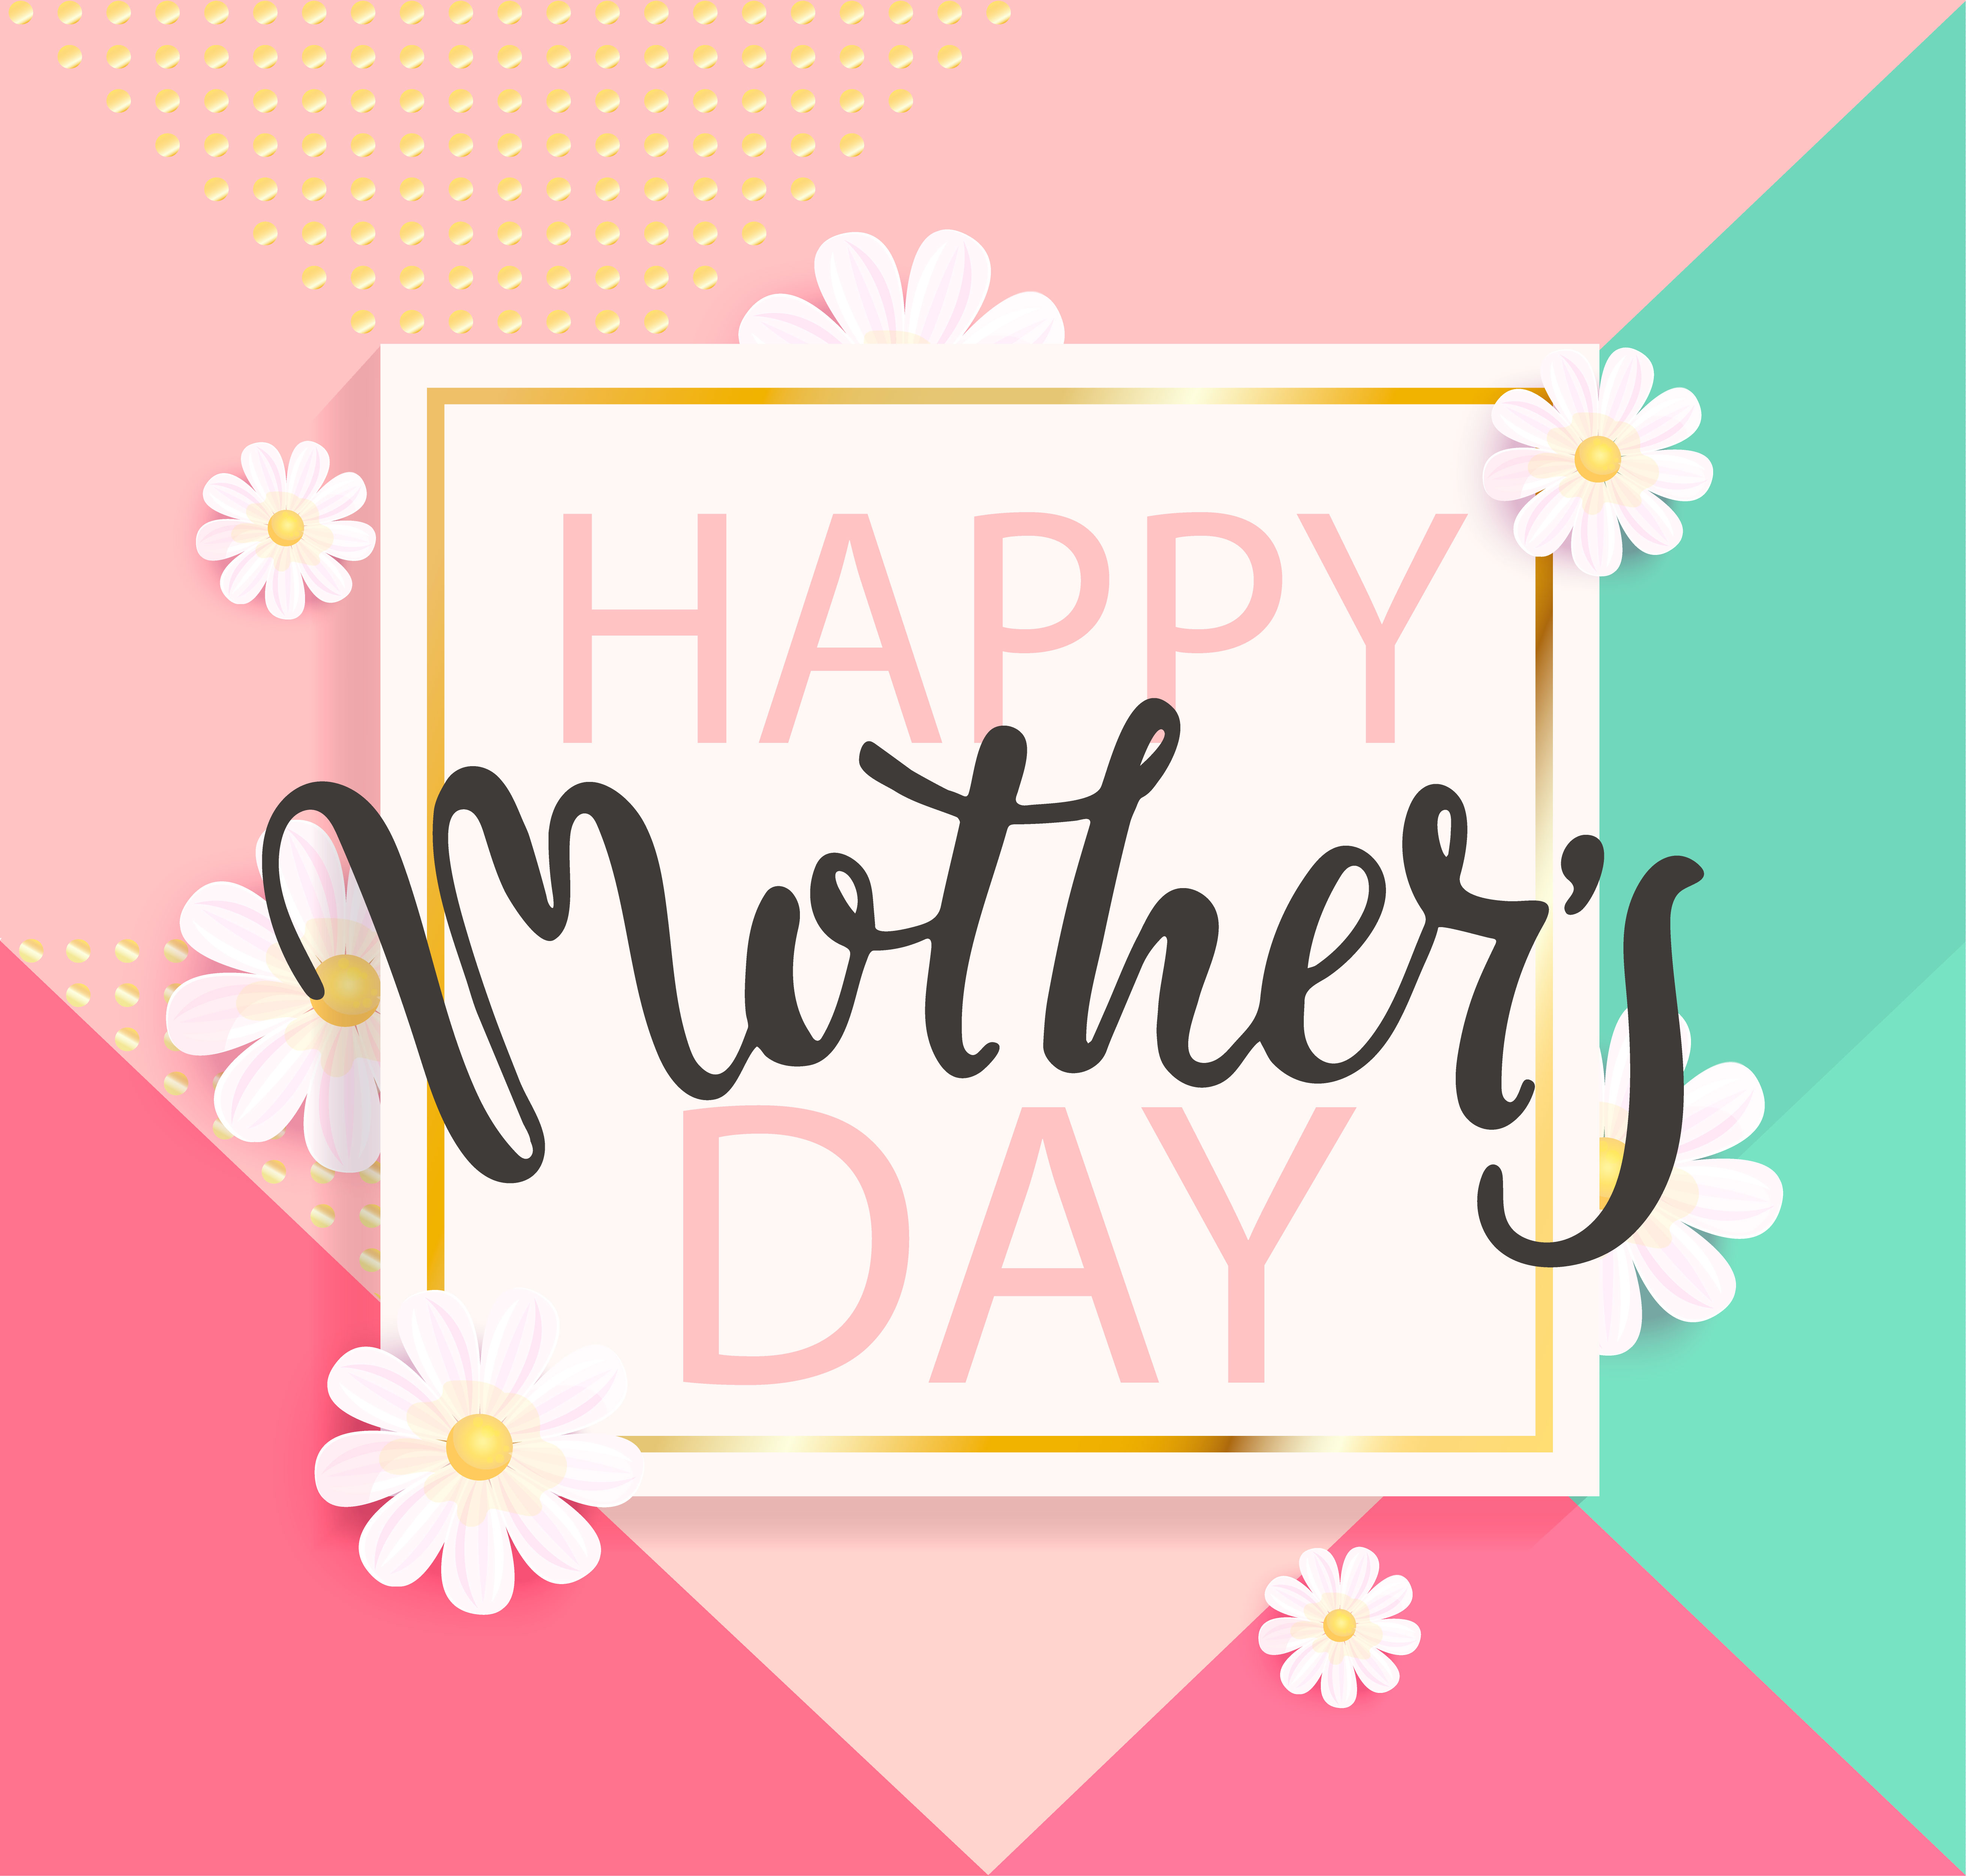 Download Happy Mother's day greeting card. - Download Free Vectors ...